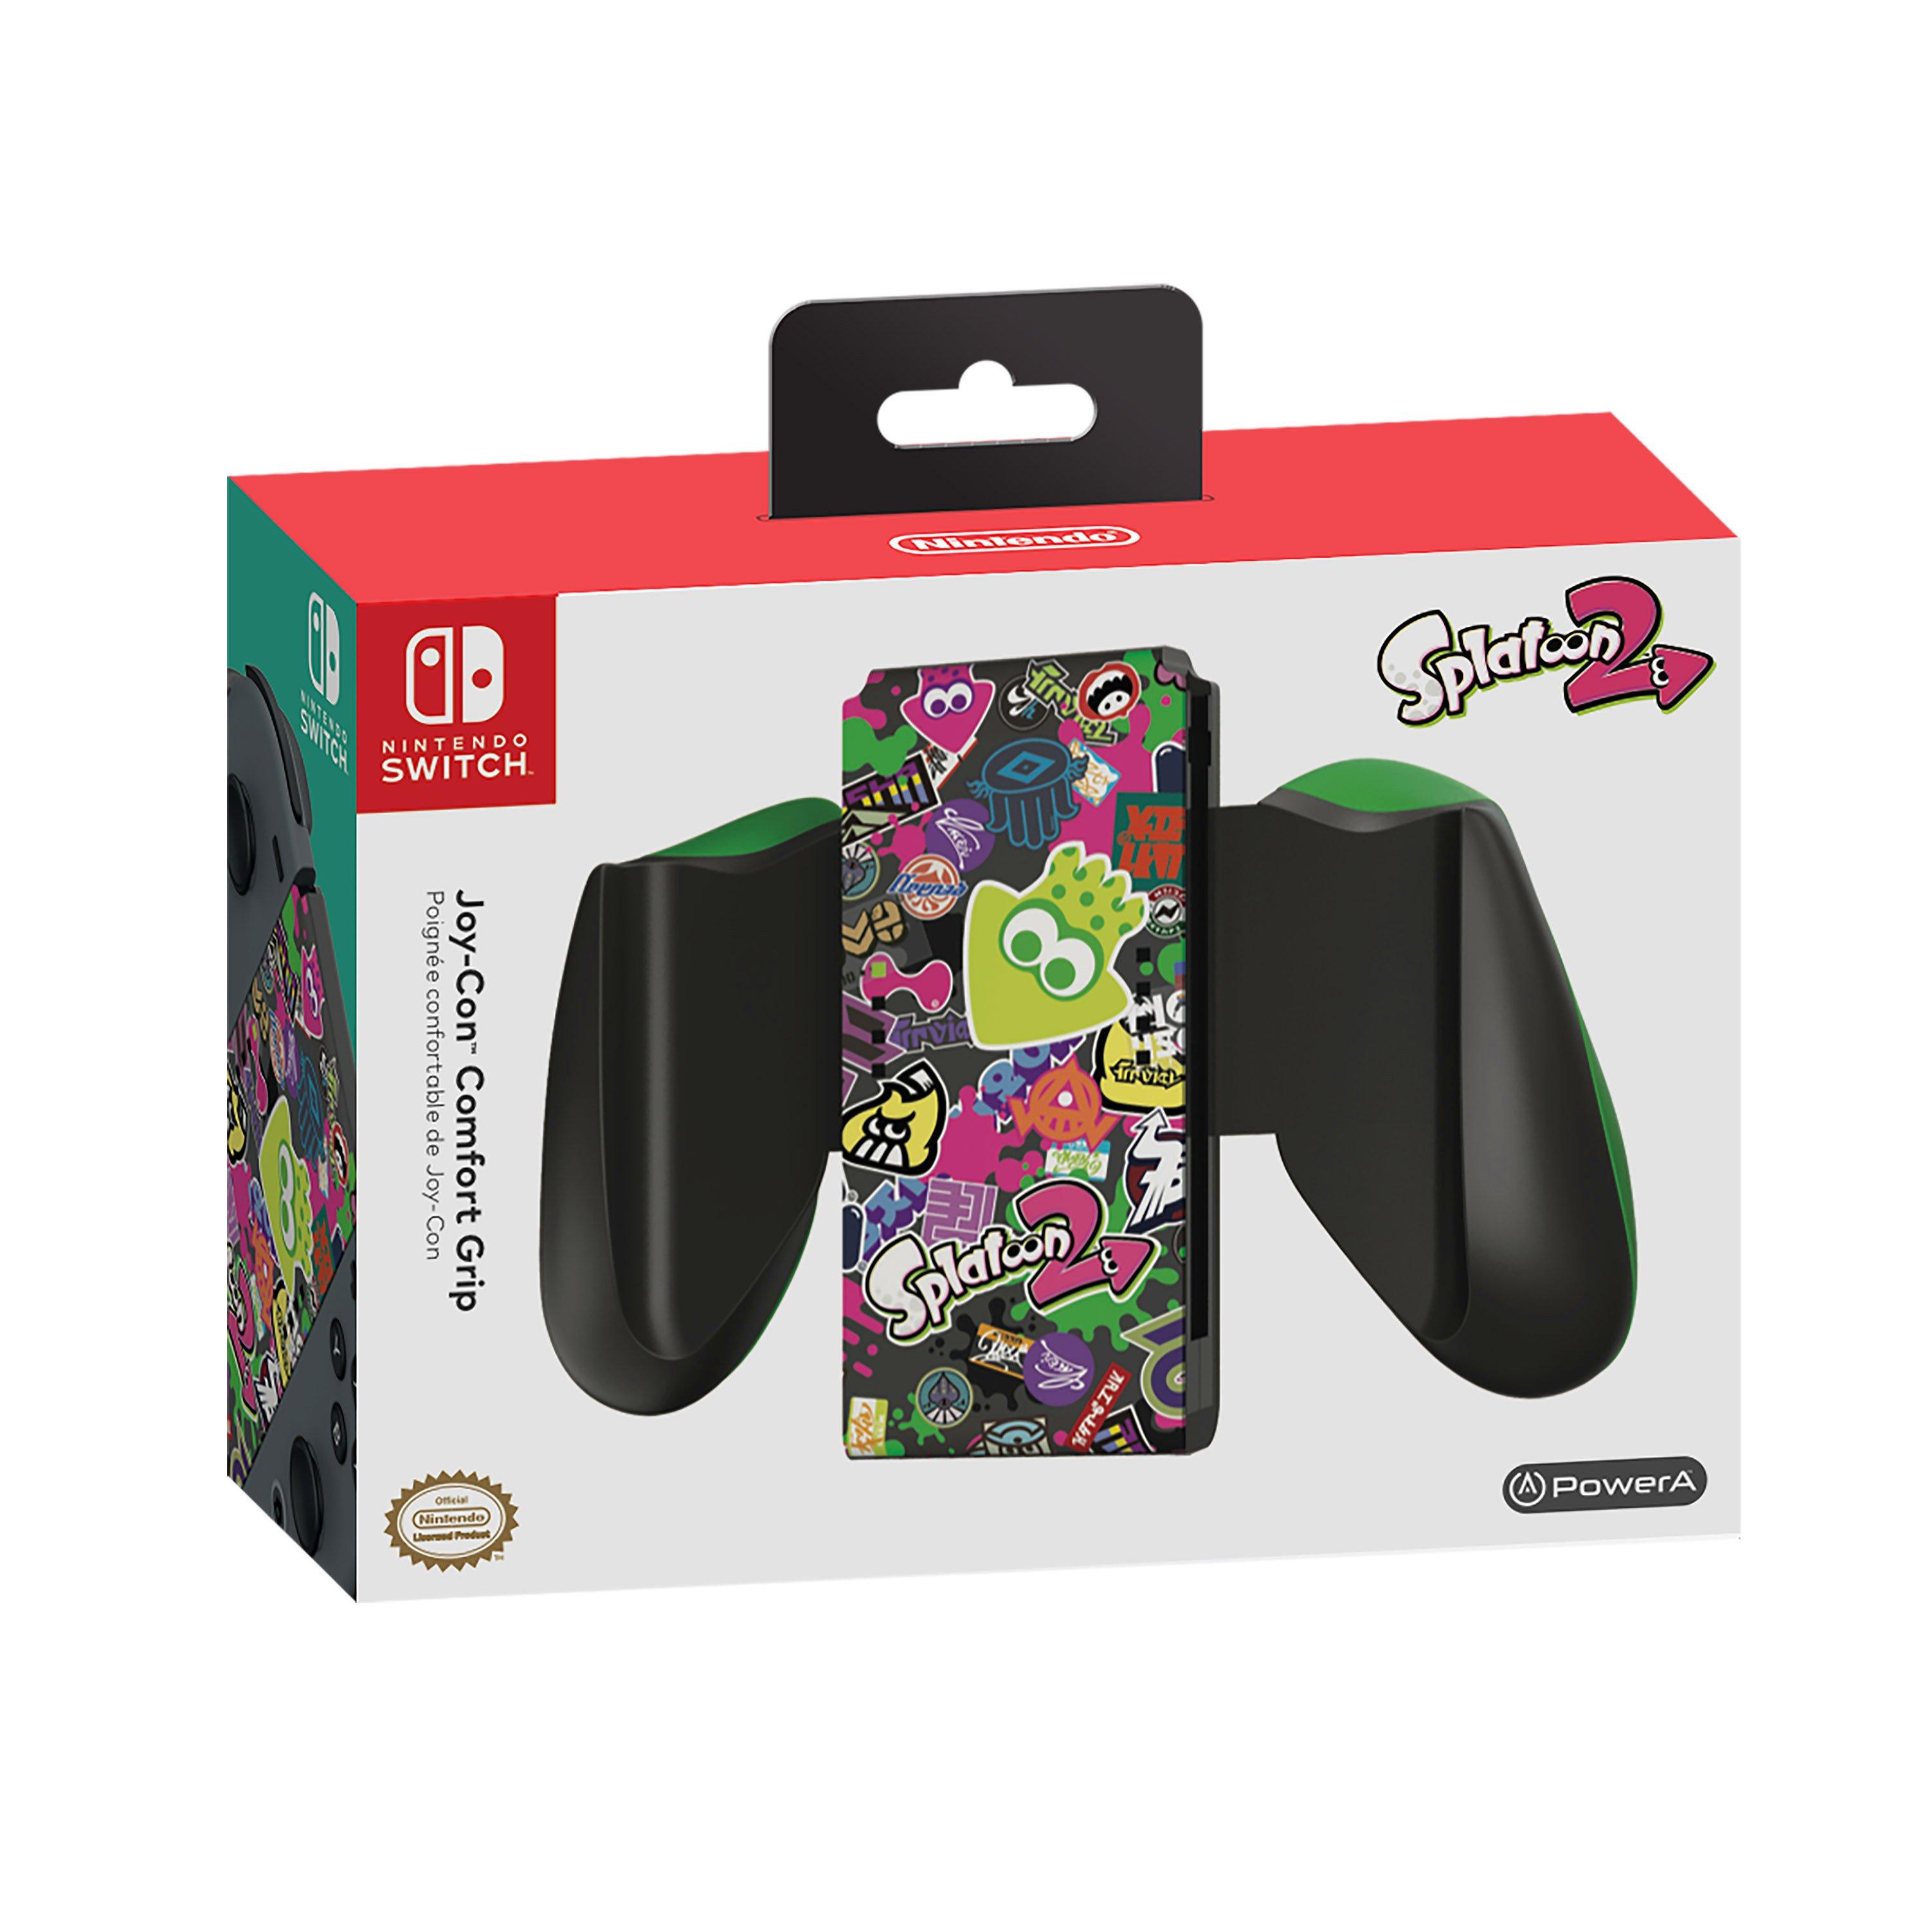 do joy con controllers come with grip